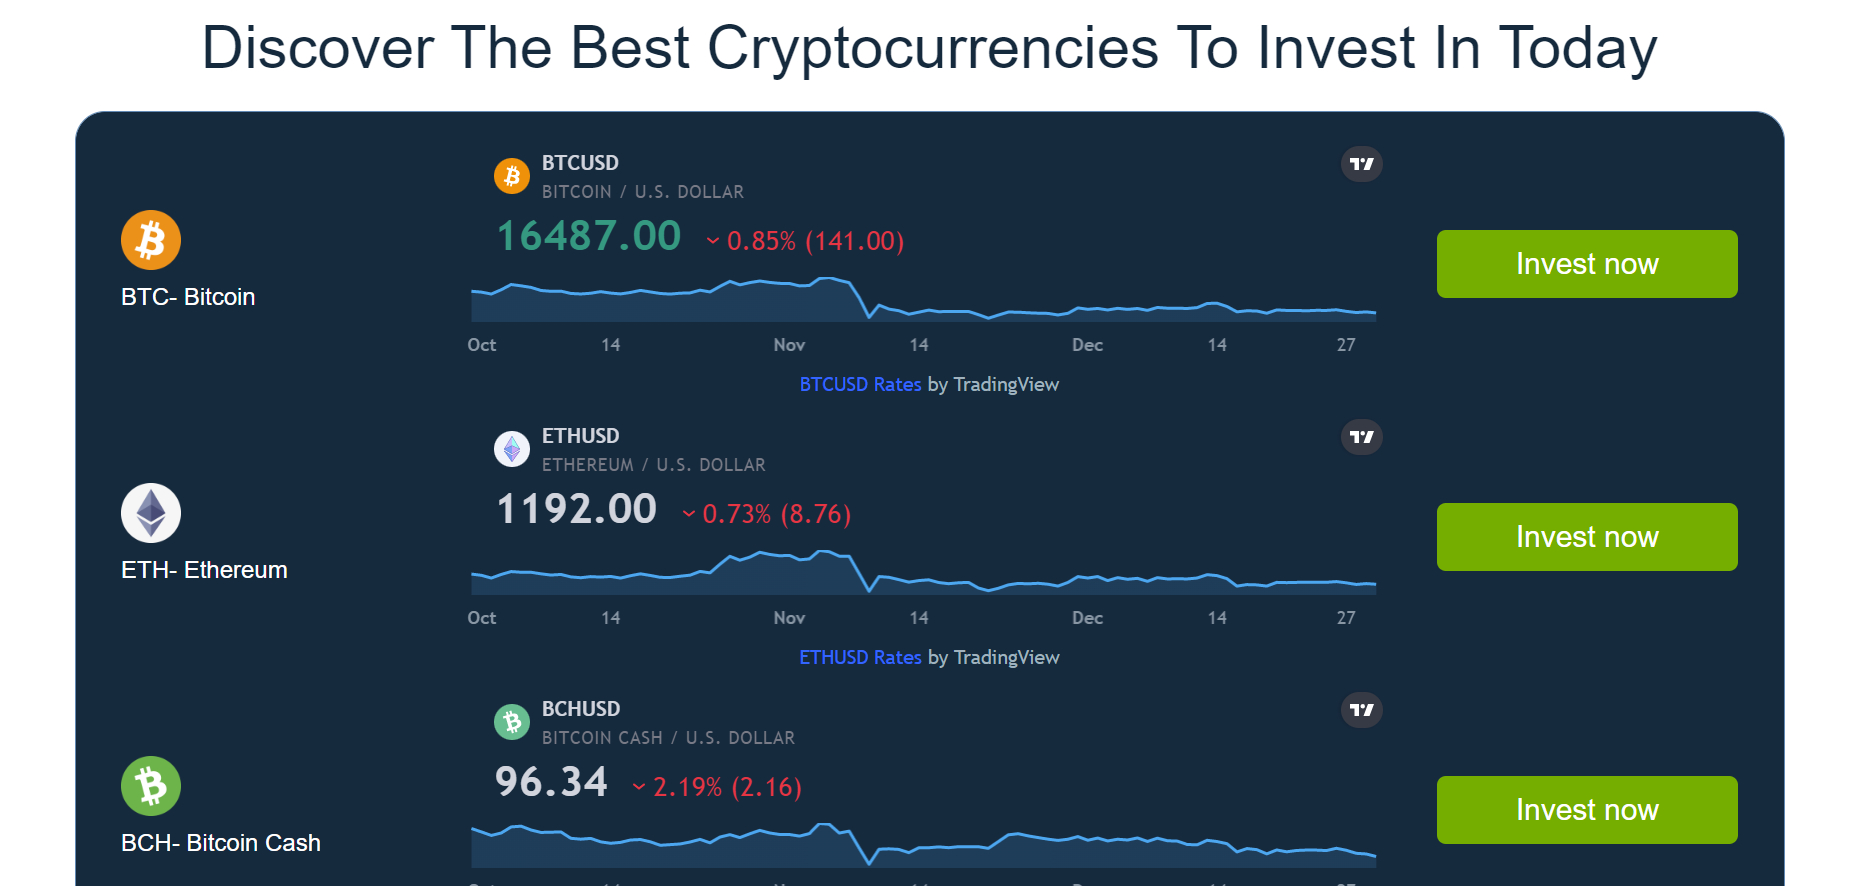 Crypto investment offering